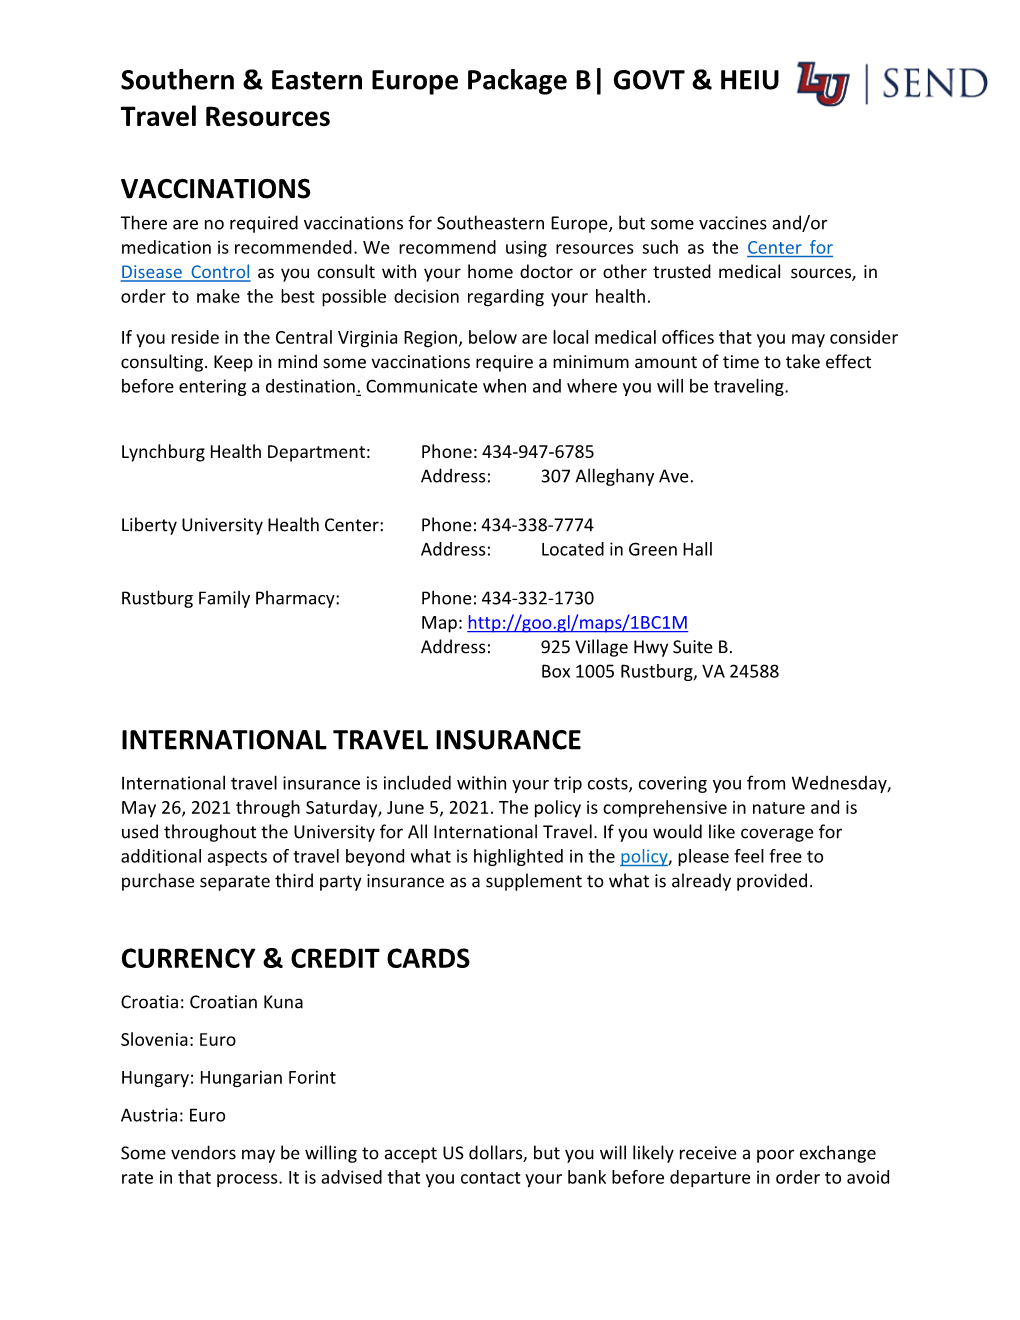 Southern & Eastern Europe Package B| GOVT & HEIU Travel Resources VACCINATIONS INTERNATIONAL TRAVEL INSURANCE CURRENCY